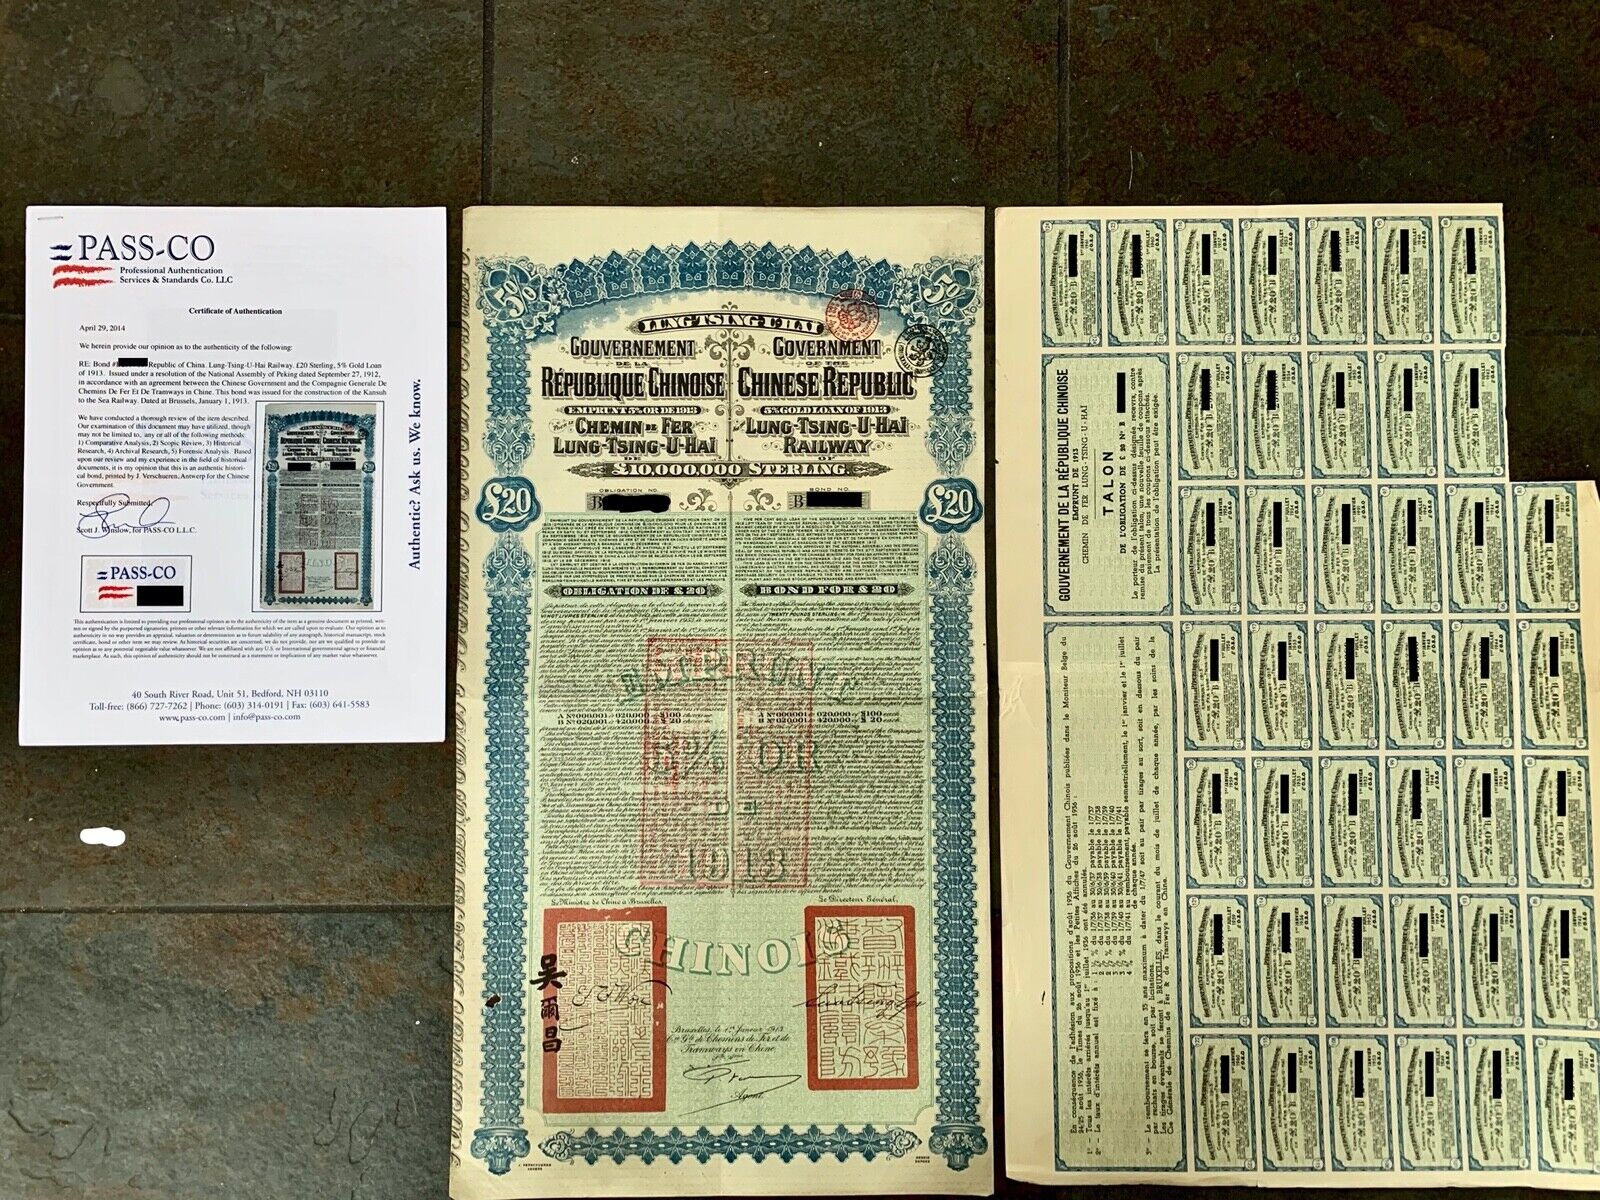 Authentic China Super Petchili Bonds 1913 Lung Tsing U Hai Coupons with PASS-CO 